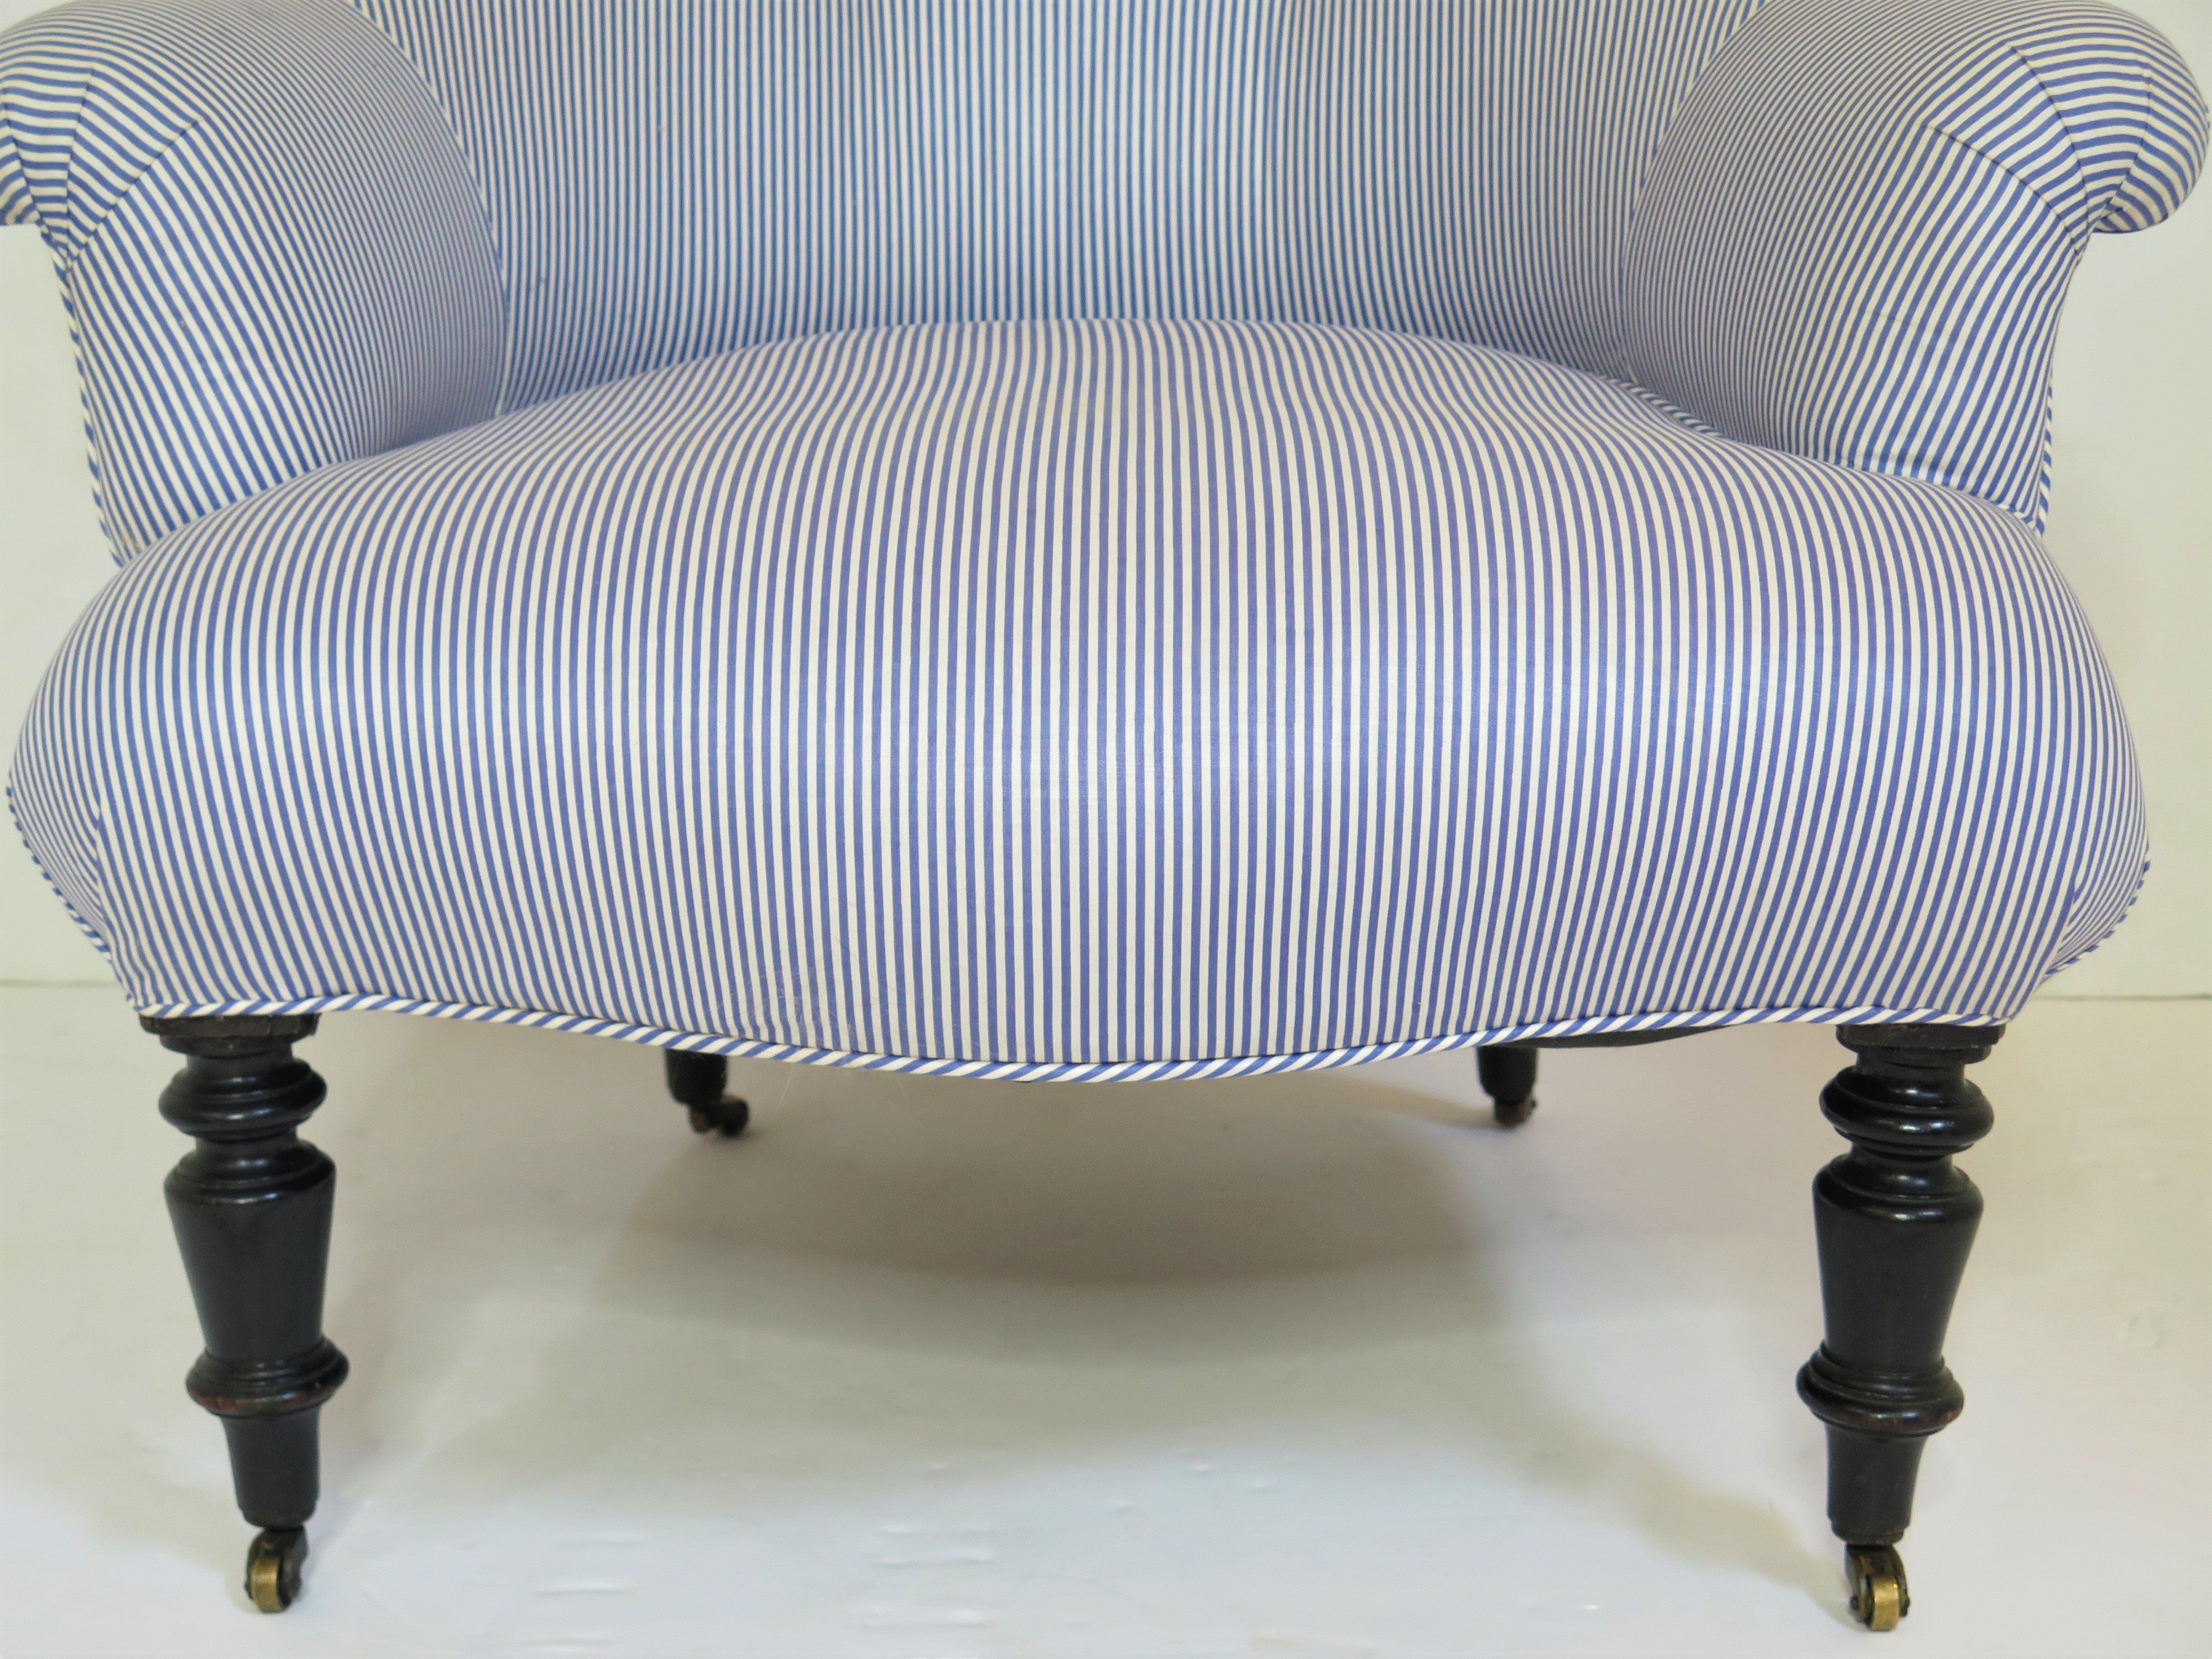 English Slipper Chairs Upholstered in Ticking Stripe